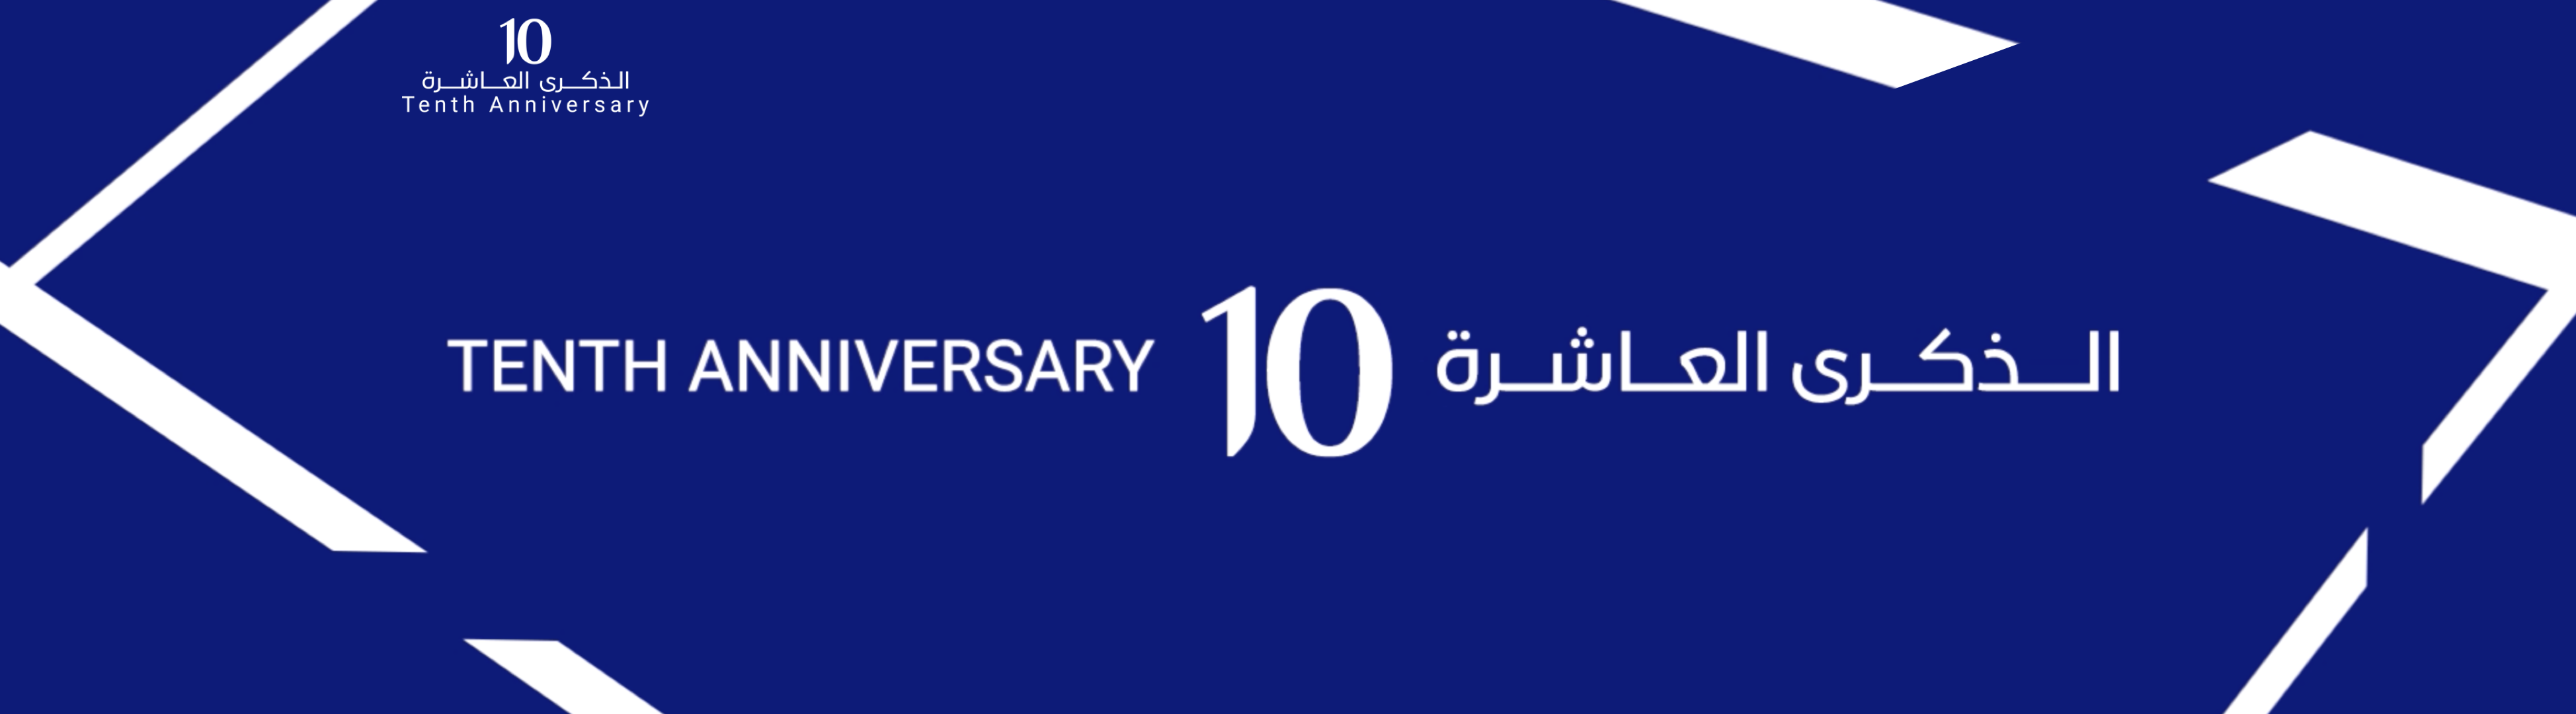 HBKU 10th Anniversary: Investment in Scientific Research: Key to Achieving Sustainable Development and a Knowledge-Based Economy